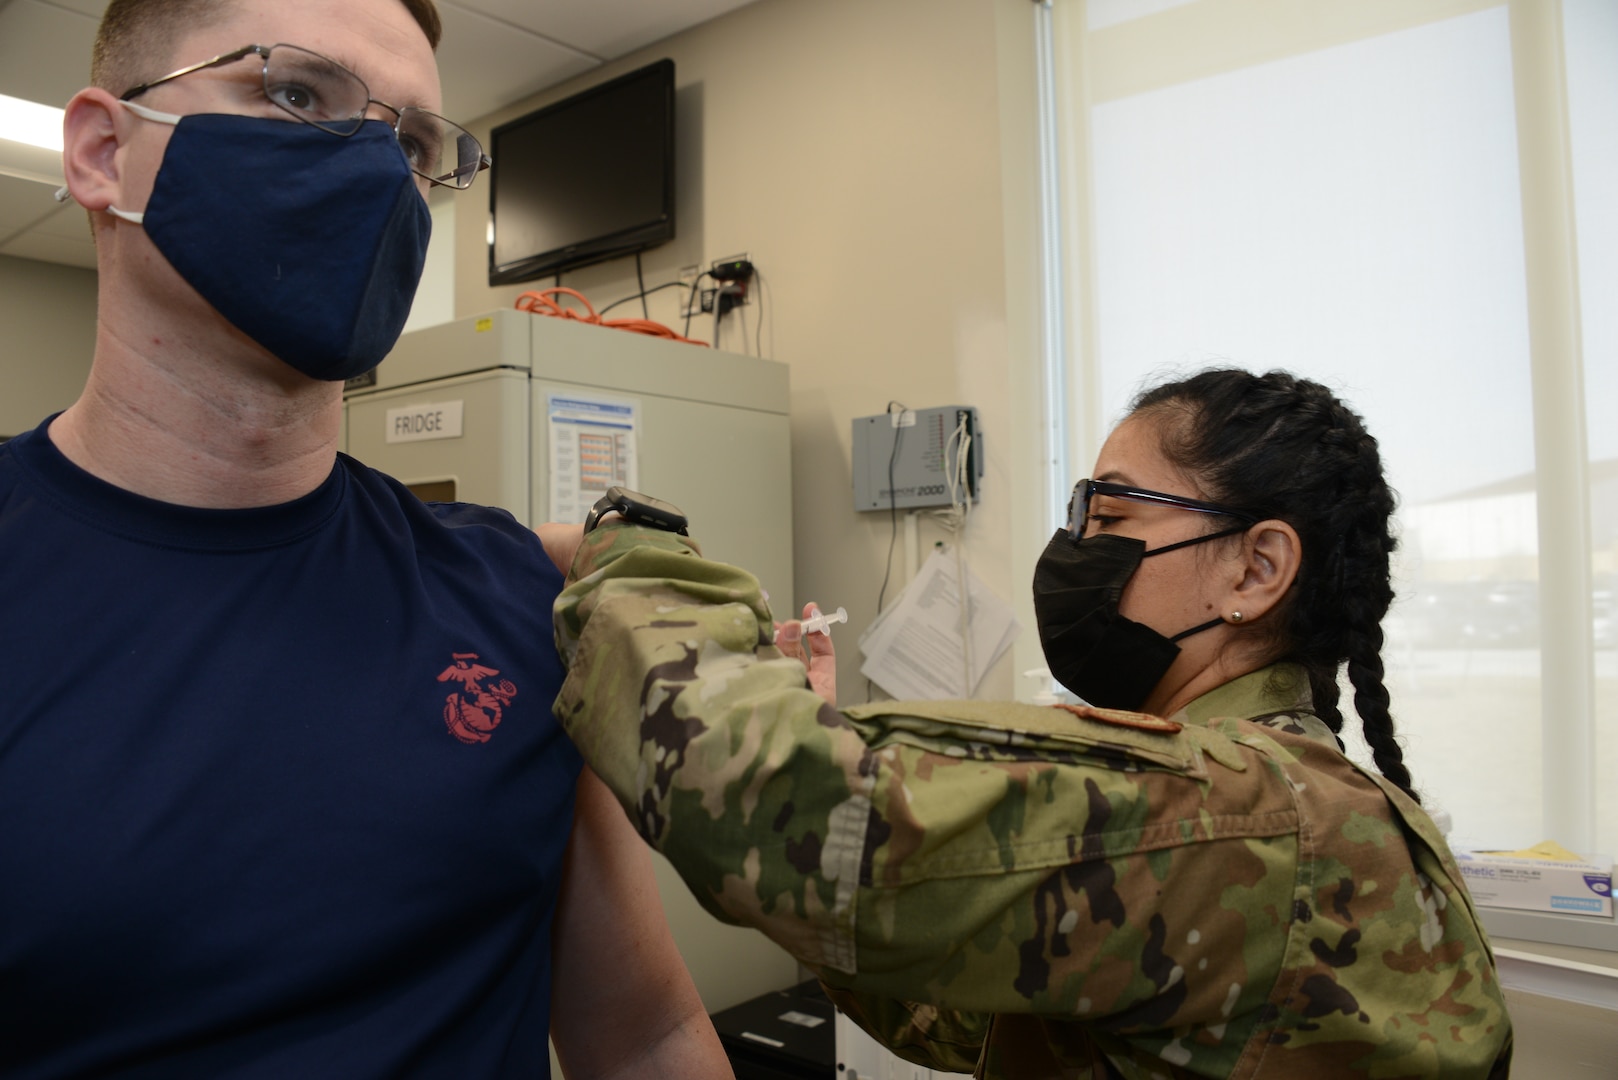 U.S. Marine Corps recruiter Staff Sgt. Jason Homard receives a COVID-19 vaccination at the Iowa Air National Guard clinic in Sioux City, Iowa, March 6, 2021. The National Guard clinic was given permission to expand COVID-19 vaccinations to active-duty members during March training weekend.